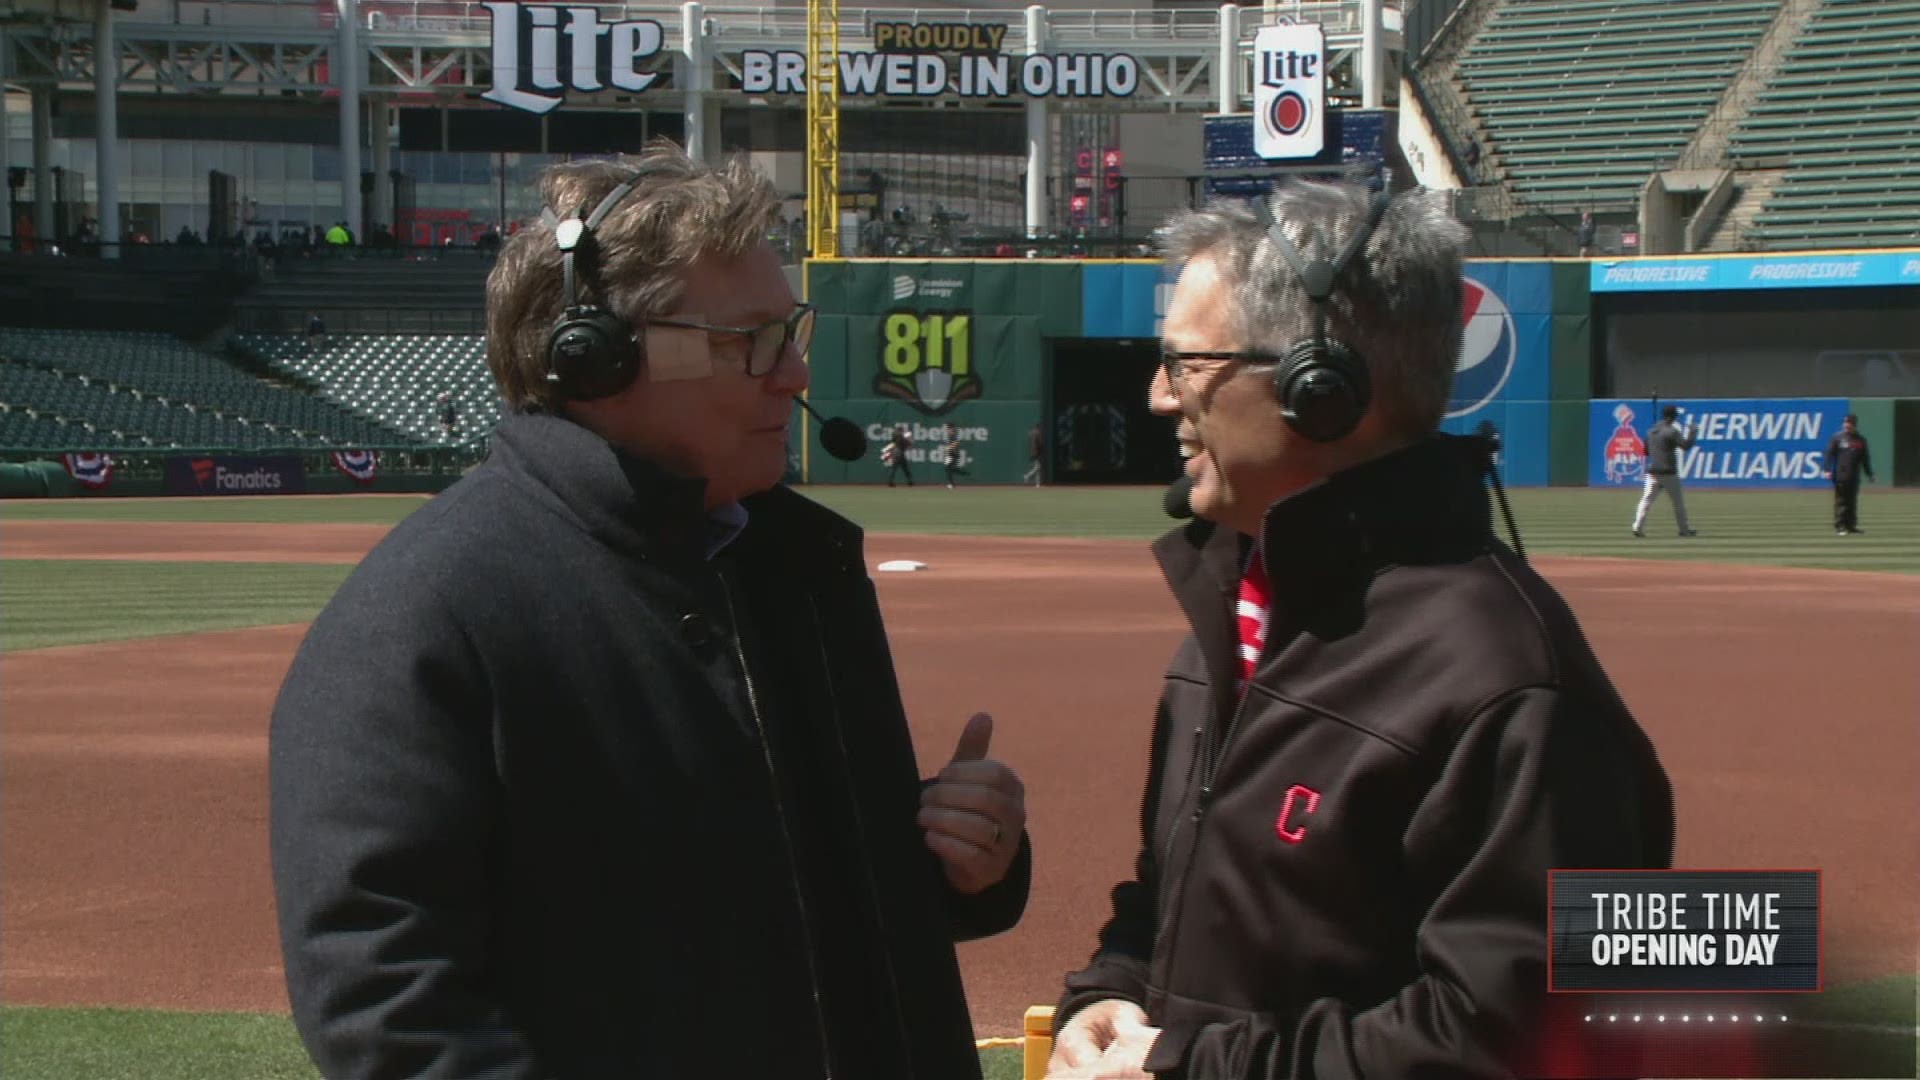 Paul Dolan spoke with WKYC's Jim Donovan before the Tribe's home opener to discuss a variety of topics, including the future of star shortstop Francisco Lindor.